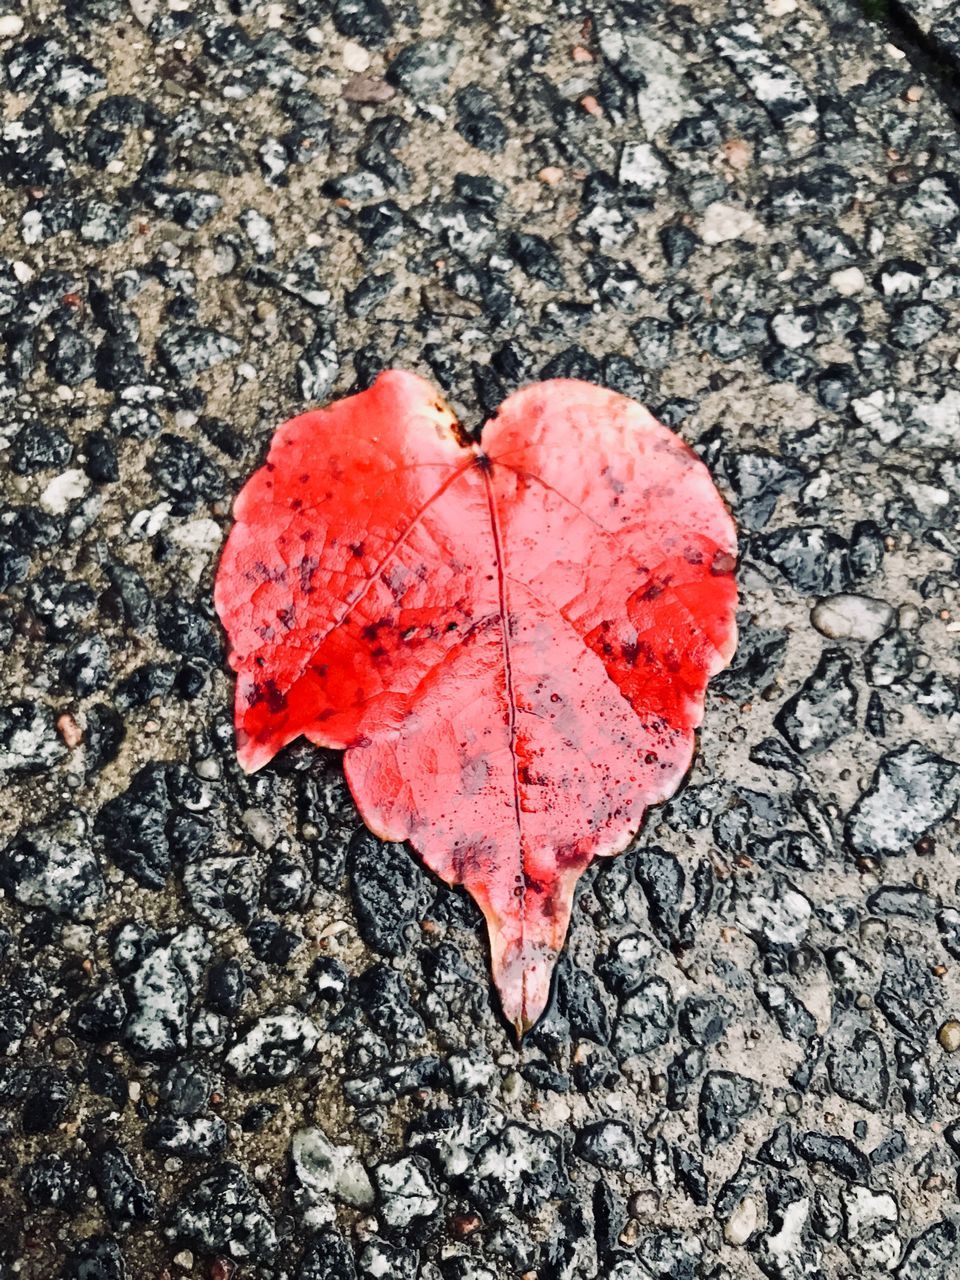 CLOSE-UP OF RED HEART SHAPE AUTUMN LEAF ON GROUND